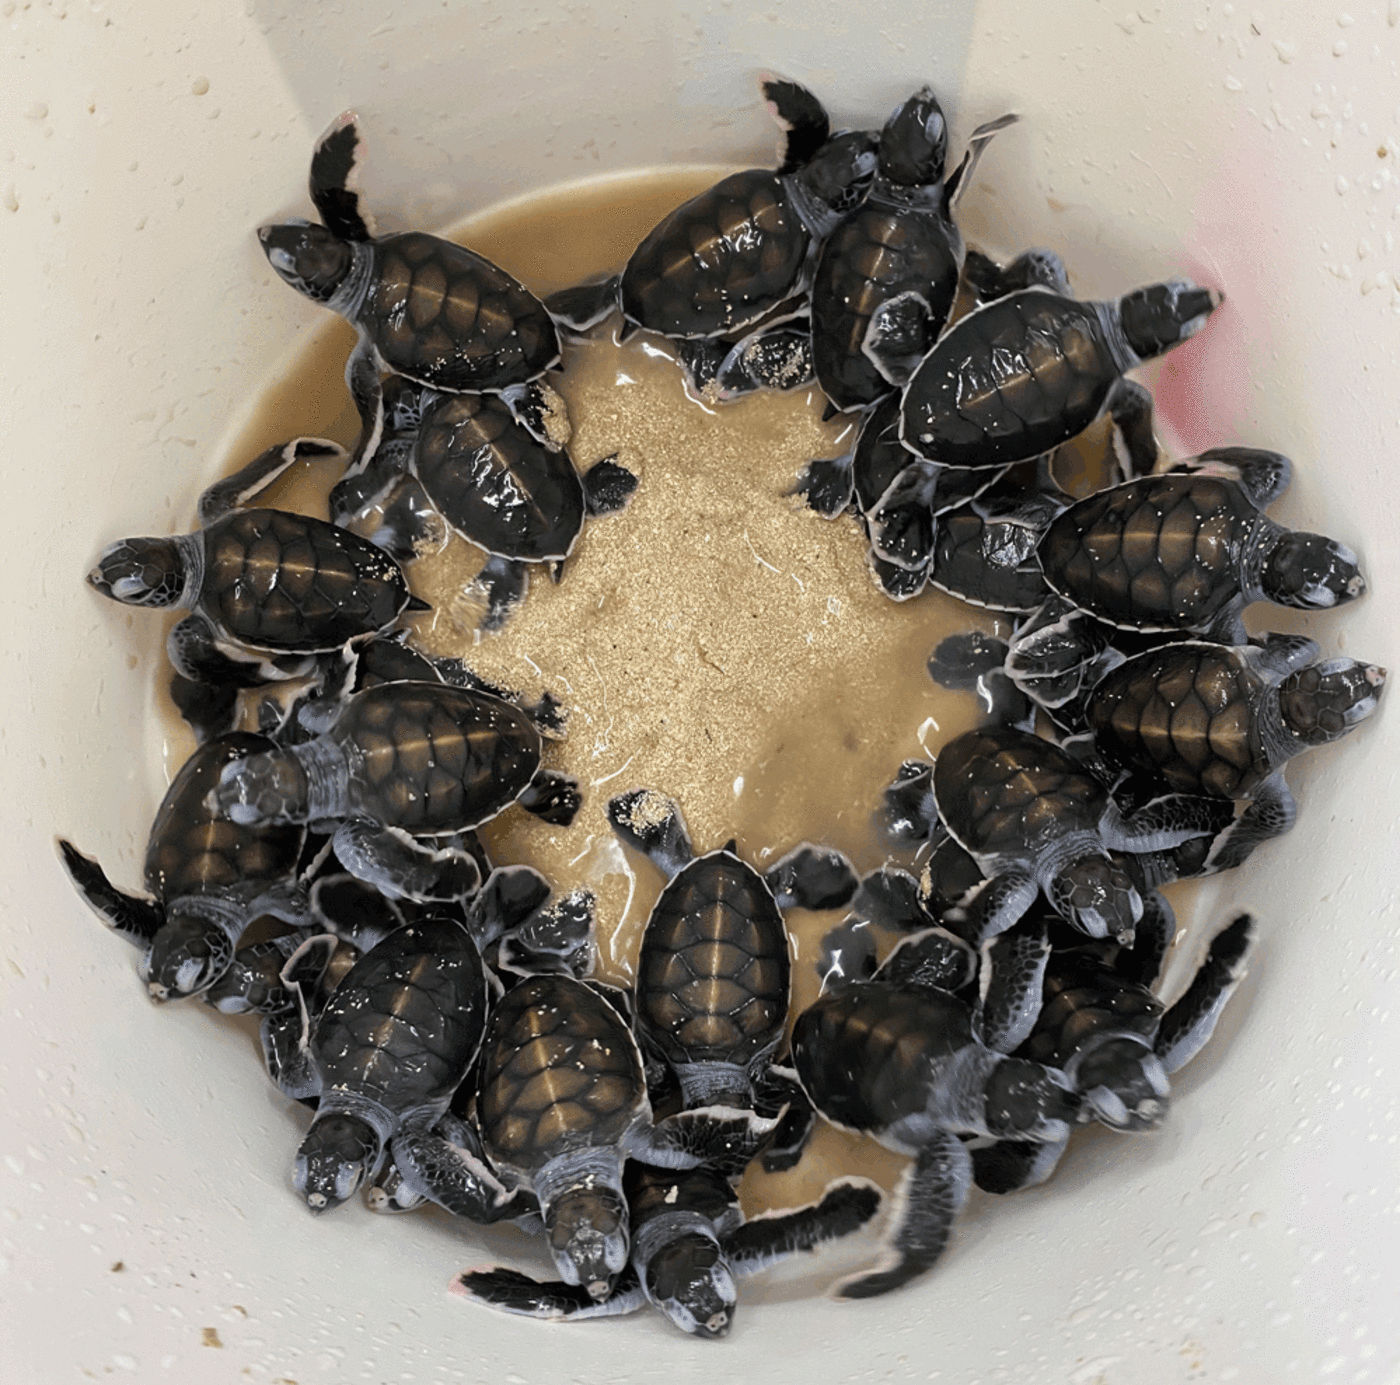 Hatchlings from Turtle Cooling Project